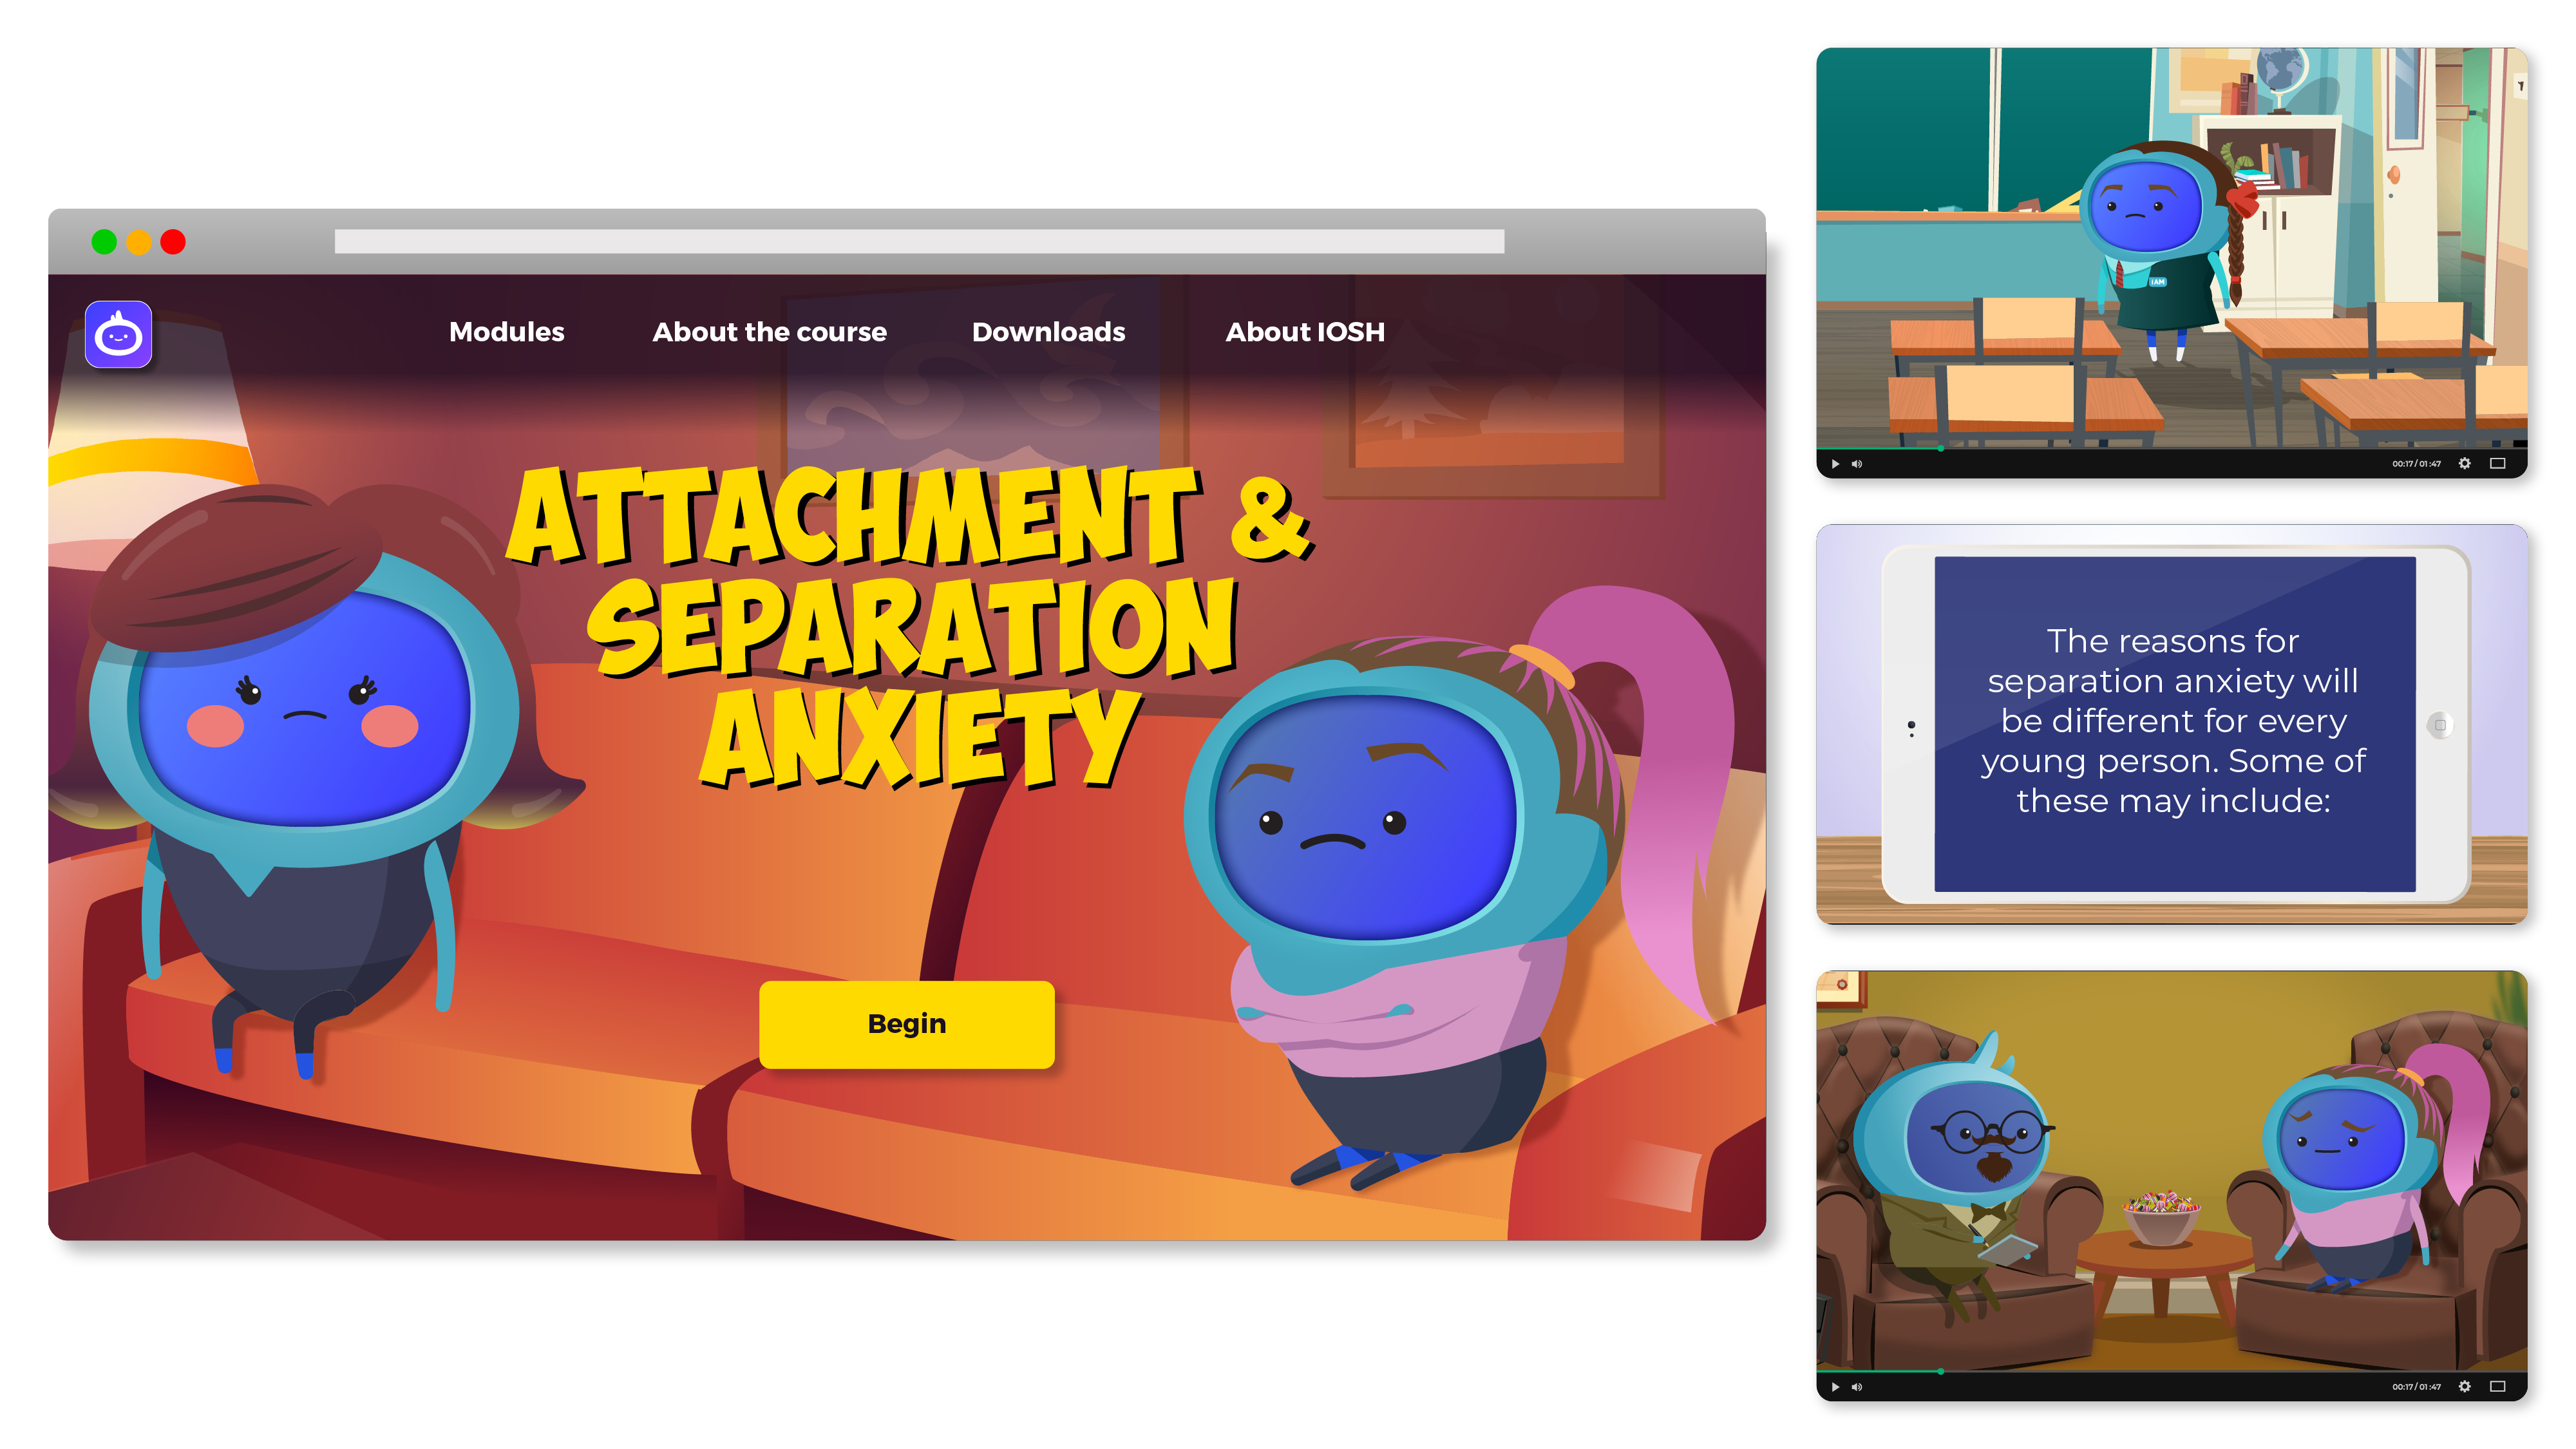 iAM Attachment & Separation Anxiety Landing Page Image